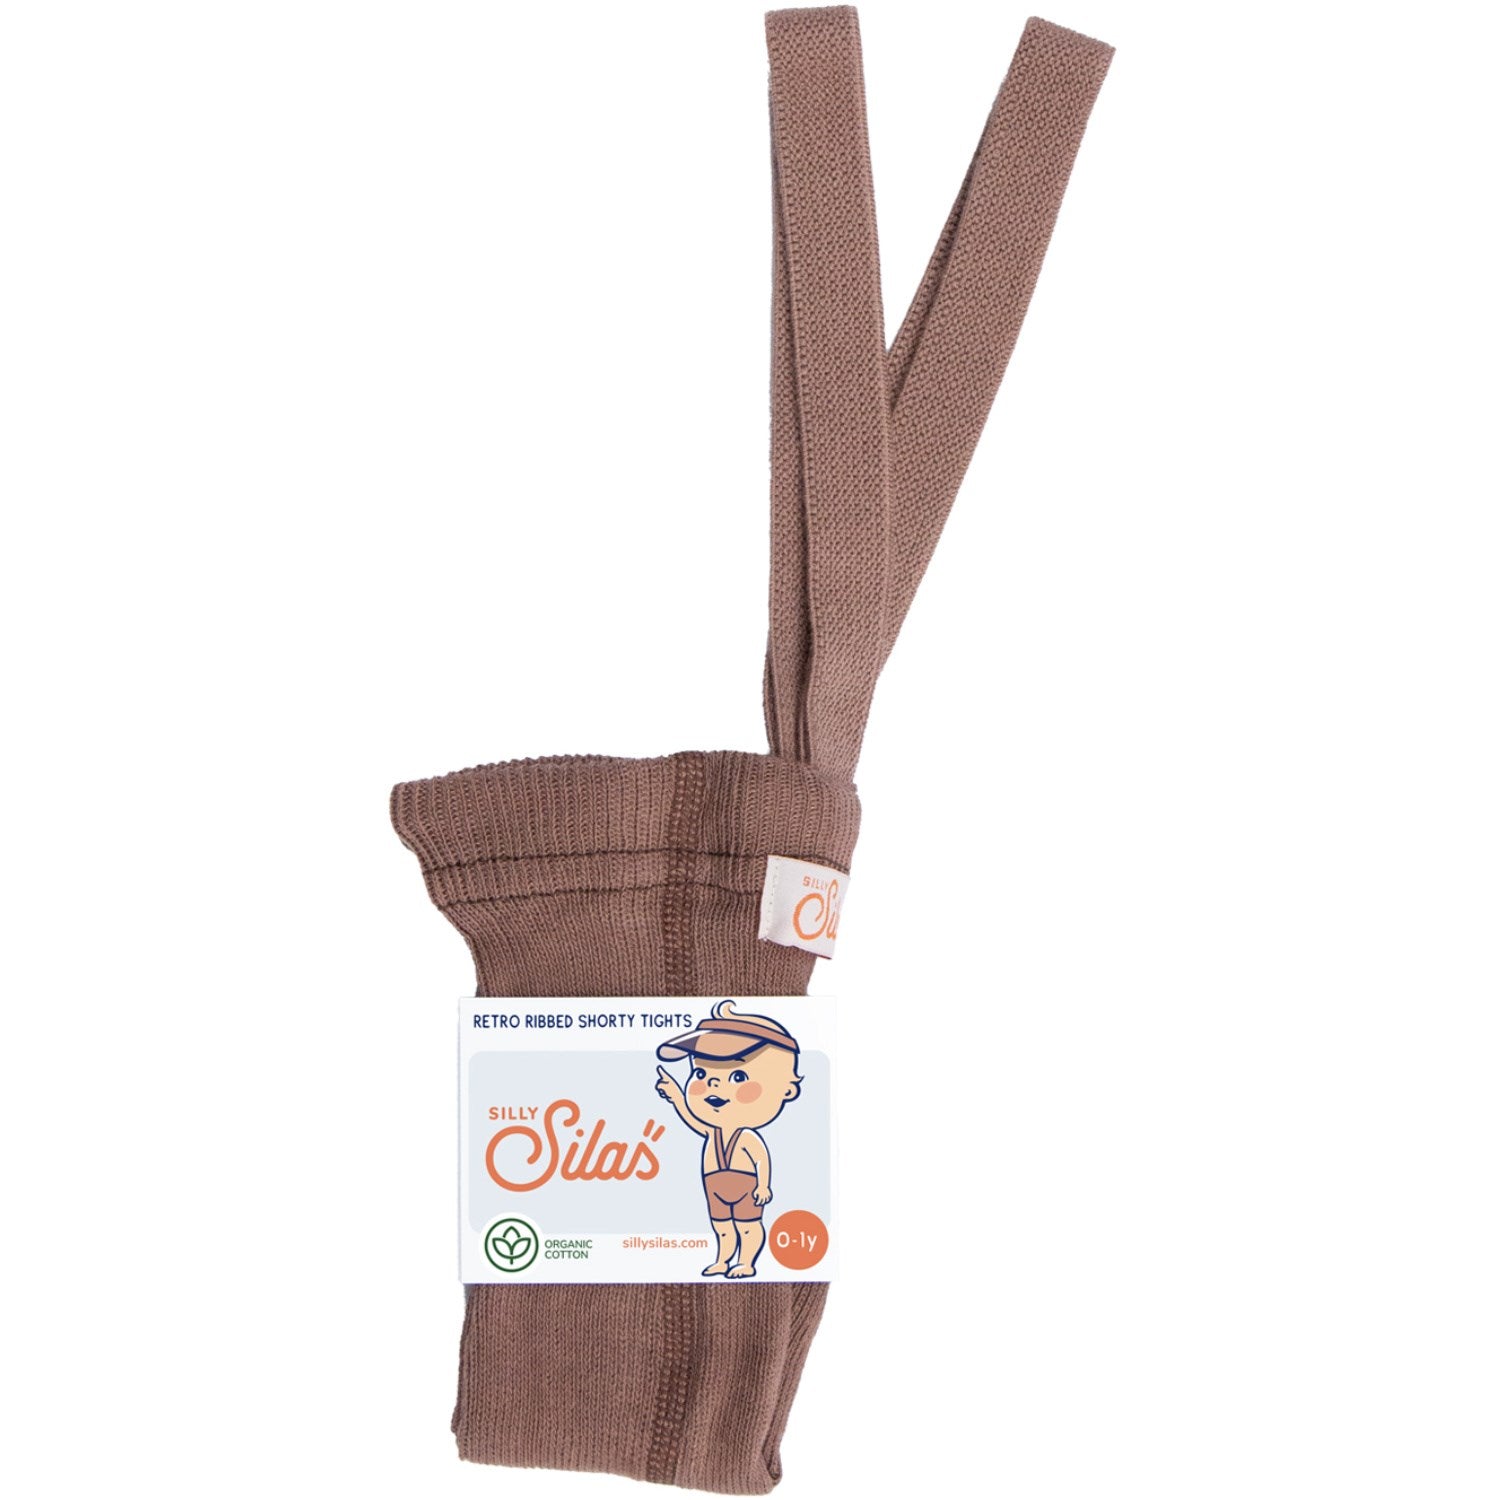 Silly Silas Granola Shorty Tights